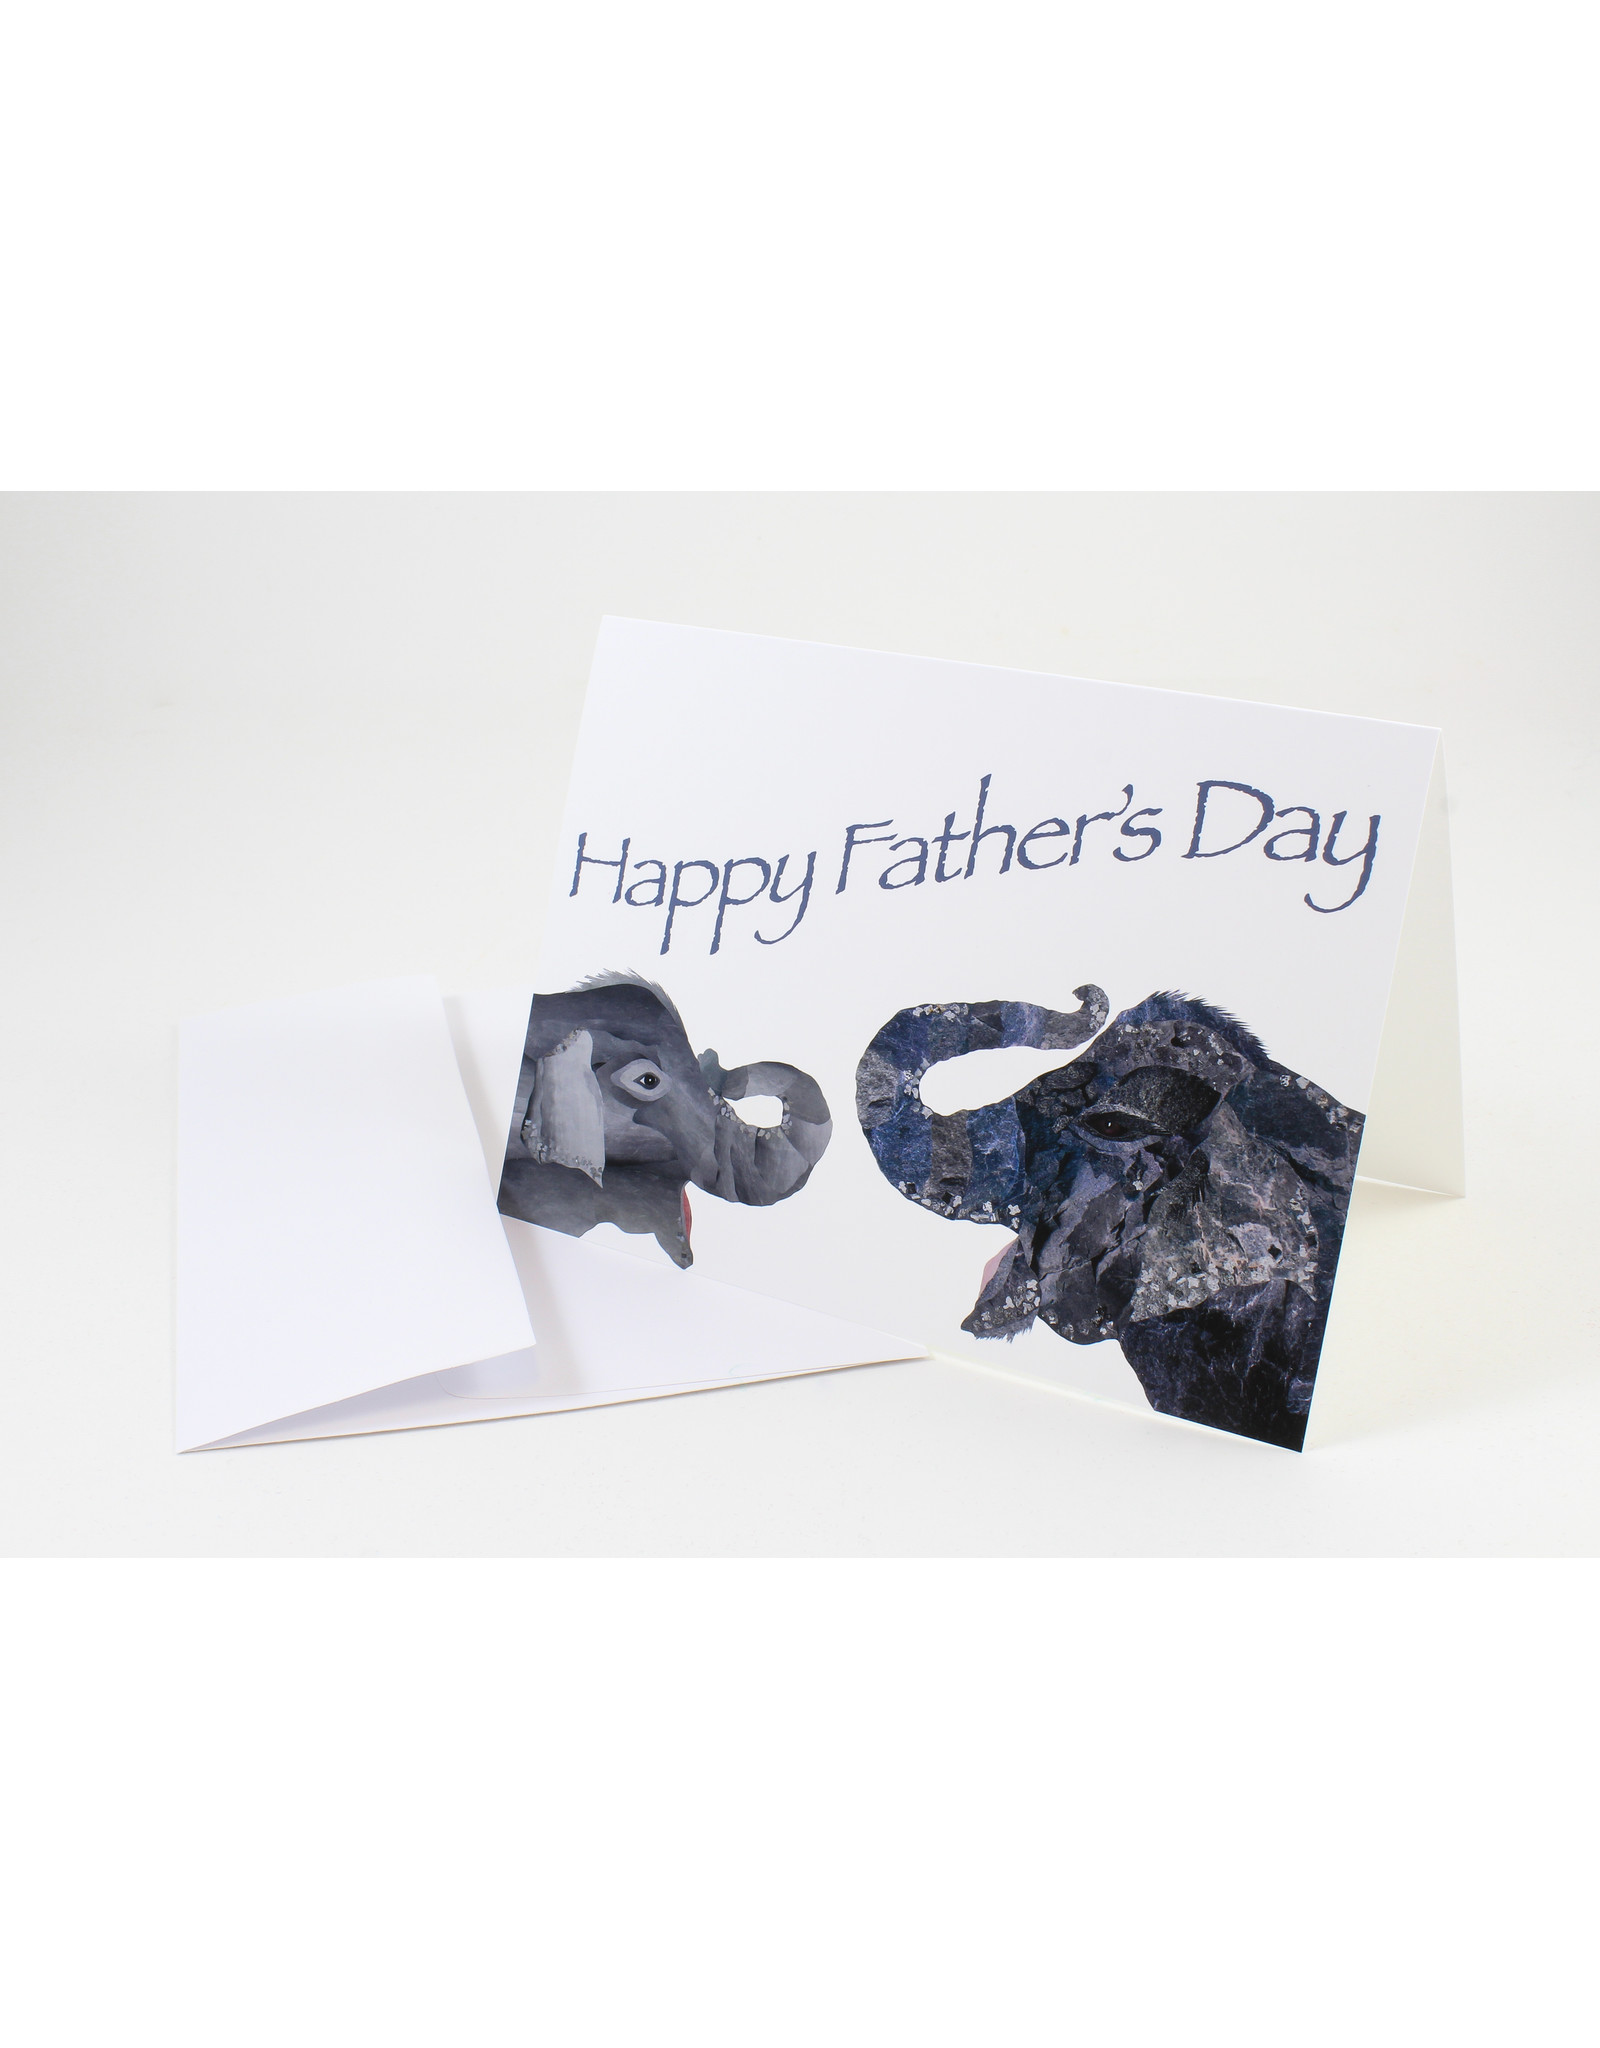 Merrideth MacDonald Father's Day Cards by Hunky Dunky Dory Paper Art